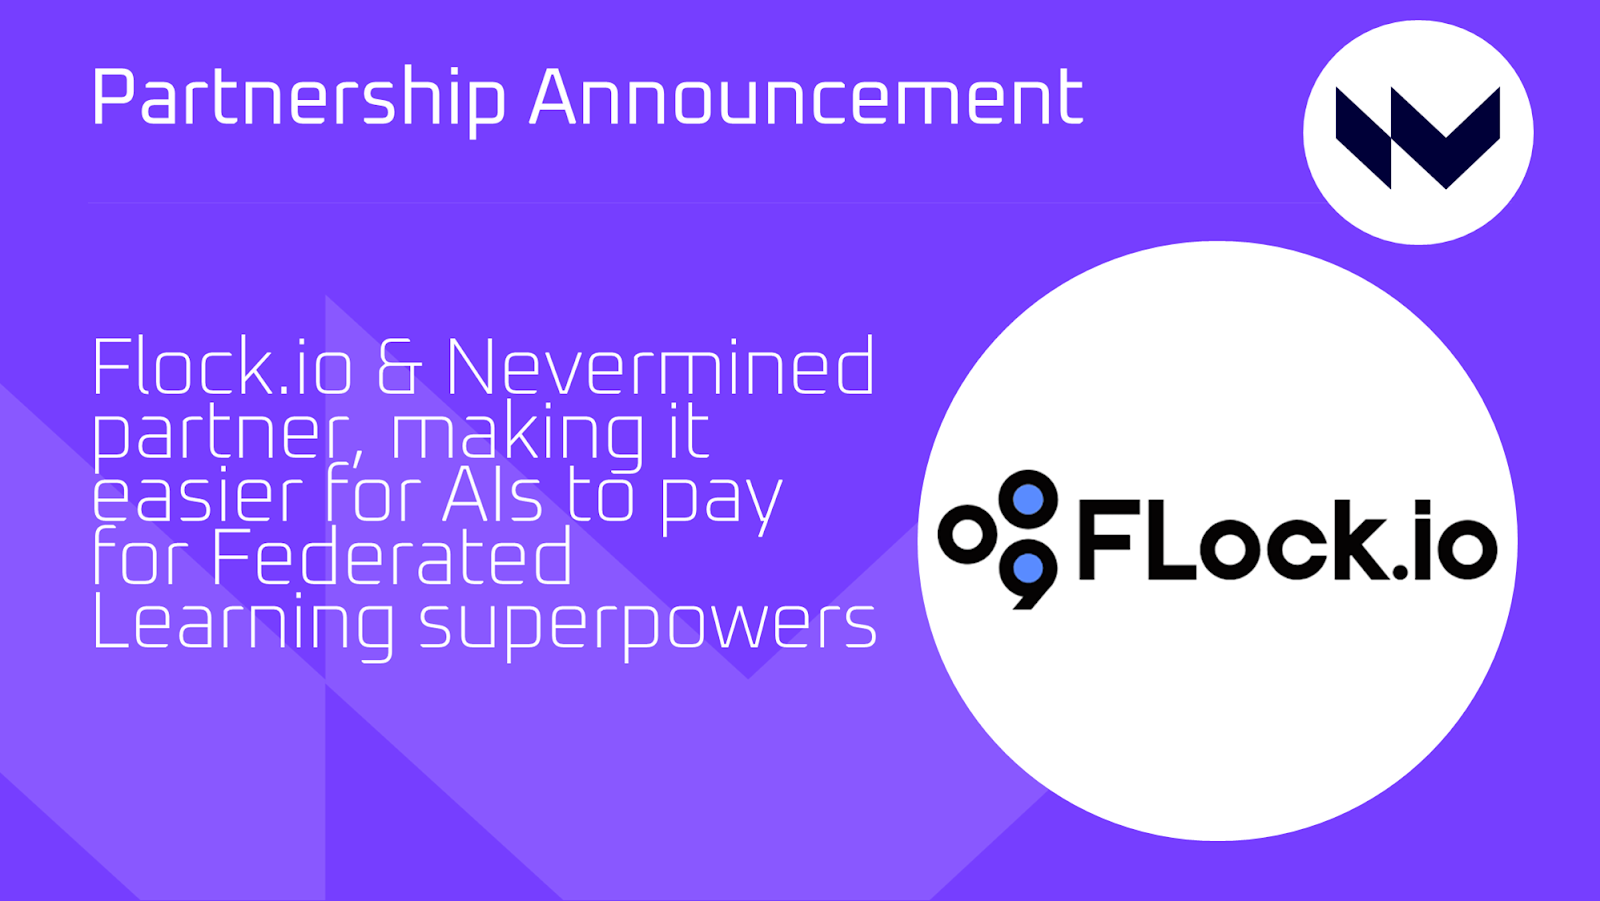 Partnership Announcement: Adding NVM Payments to FLock.io so AIs can pay, and get paid, for Federated Learning Models